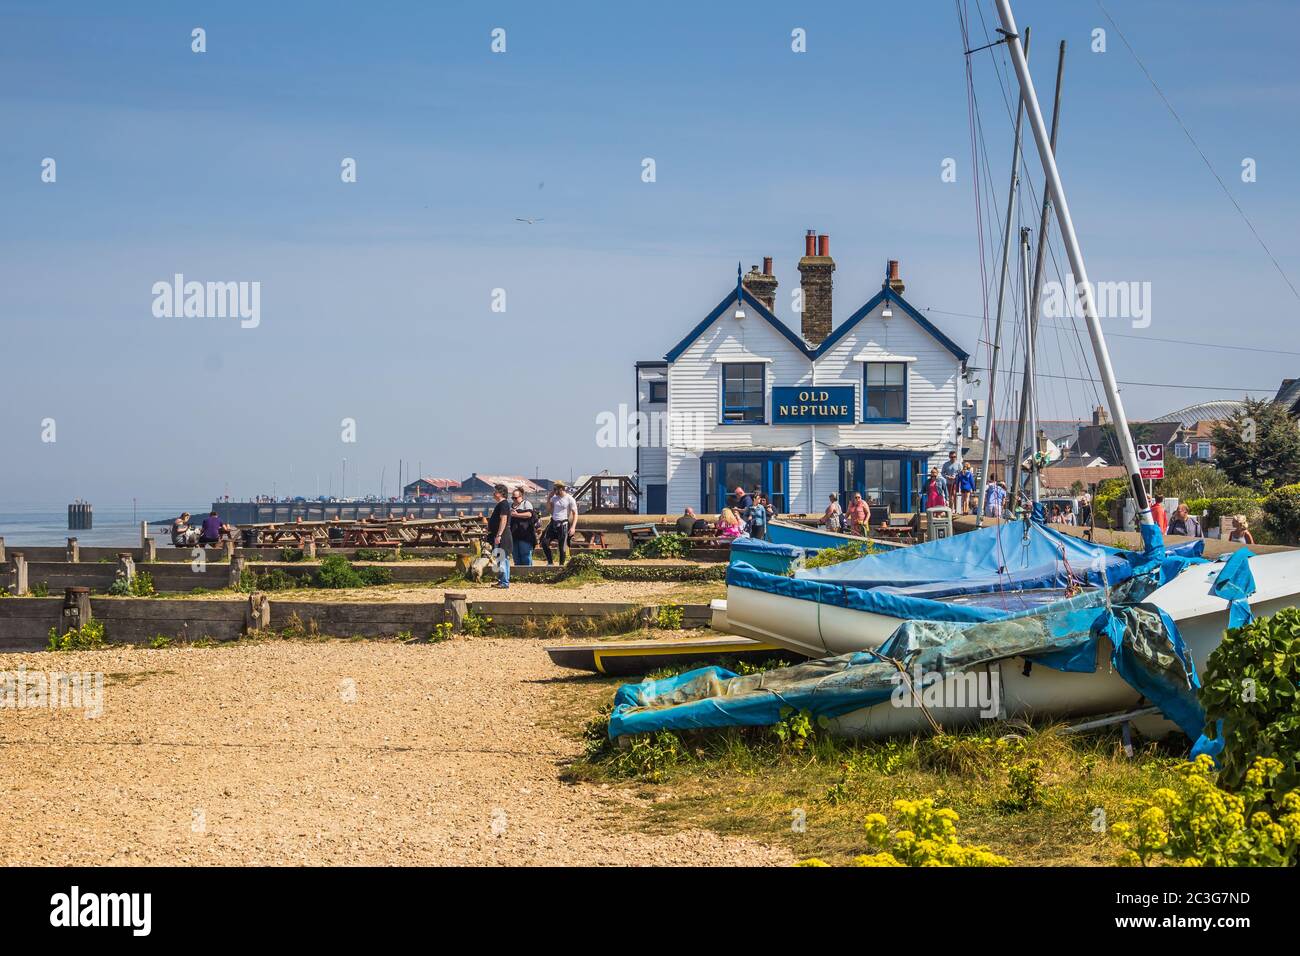 Beach scene with seaside pub, people walking along the beach and old wooden boats in the foreground. Taken in Whitstable Bay on a sunny weekend. Stock Photo